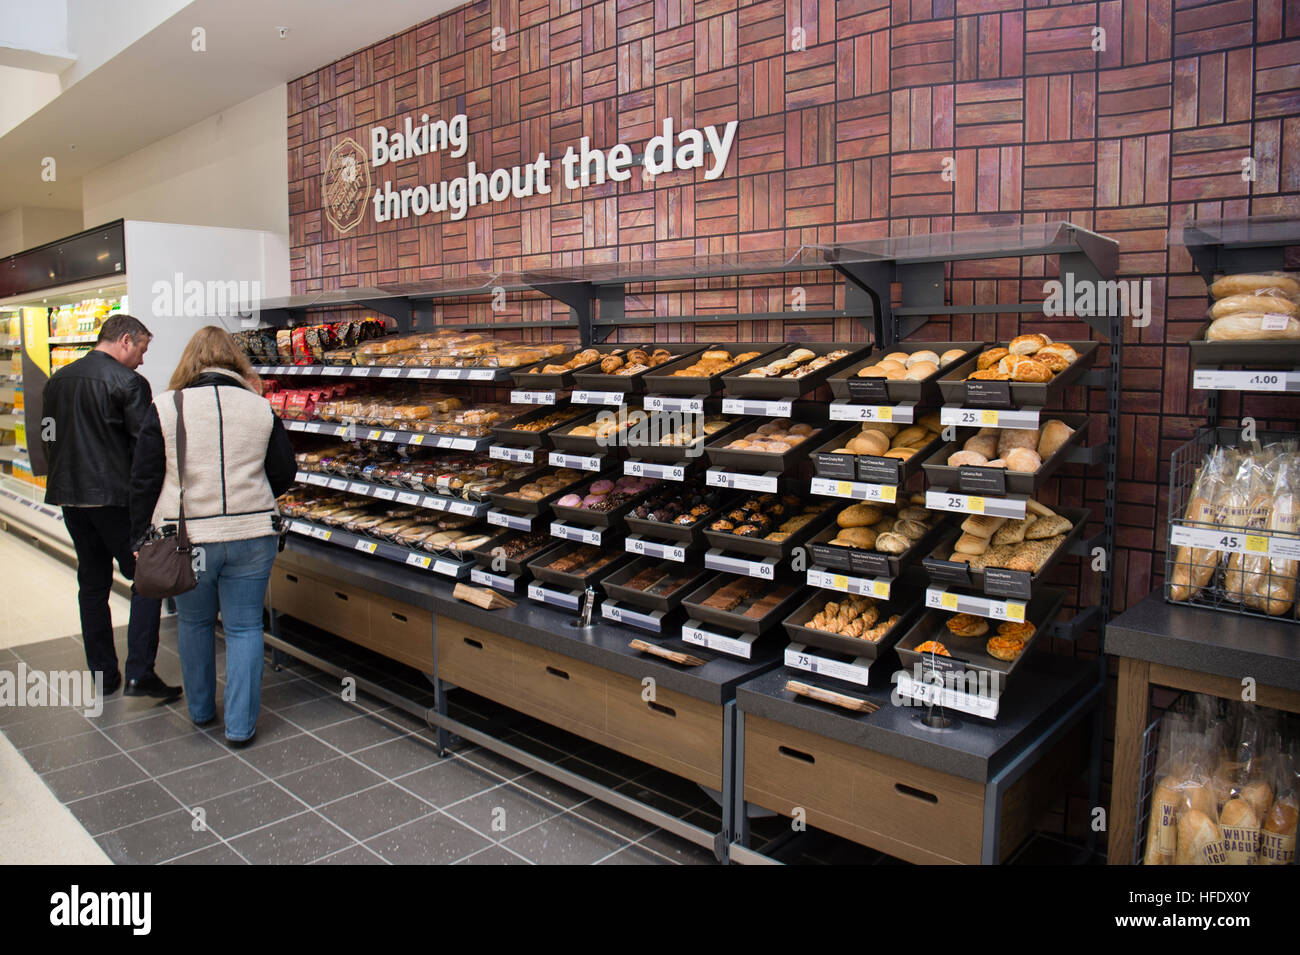 People shopping for bakery products in the Tesco supermarket superstore, Aberystwyth Wales UK (on the opening day of the store 24 November 2016) Stock Photo